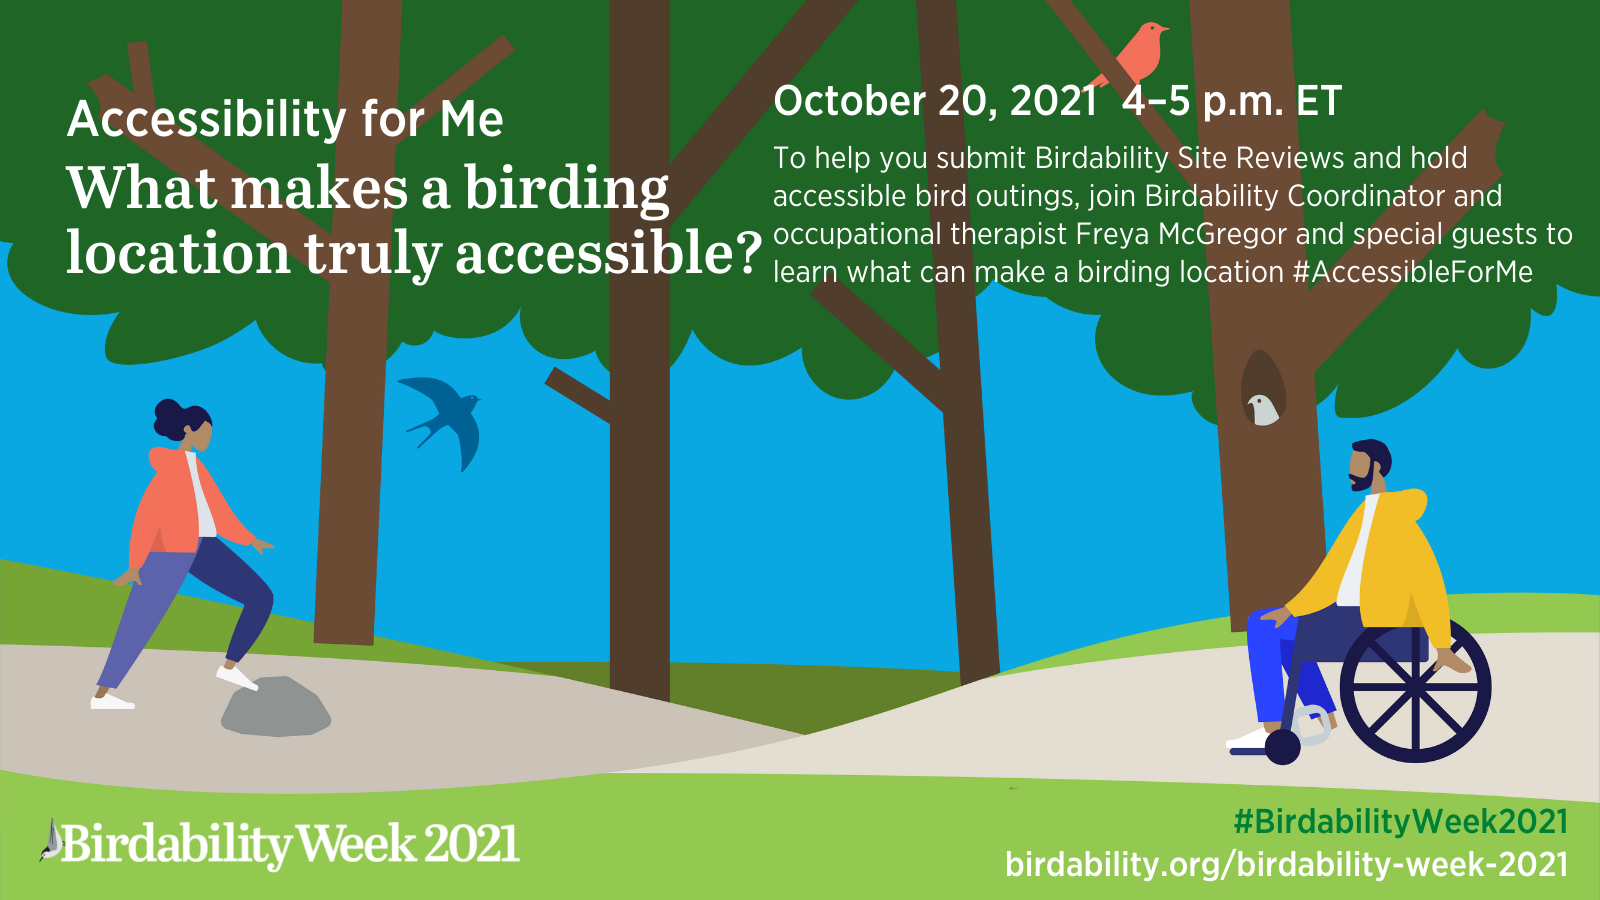 Accessbility for me. Learn what makes a birding location truly accessible at this online event October 20 2021. Visit birdability.org/birdability-week-2021 to learn more.